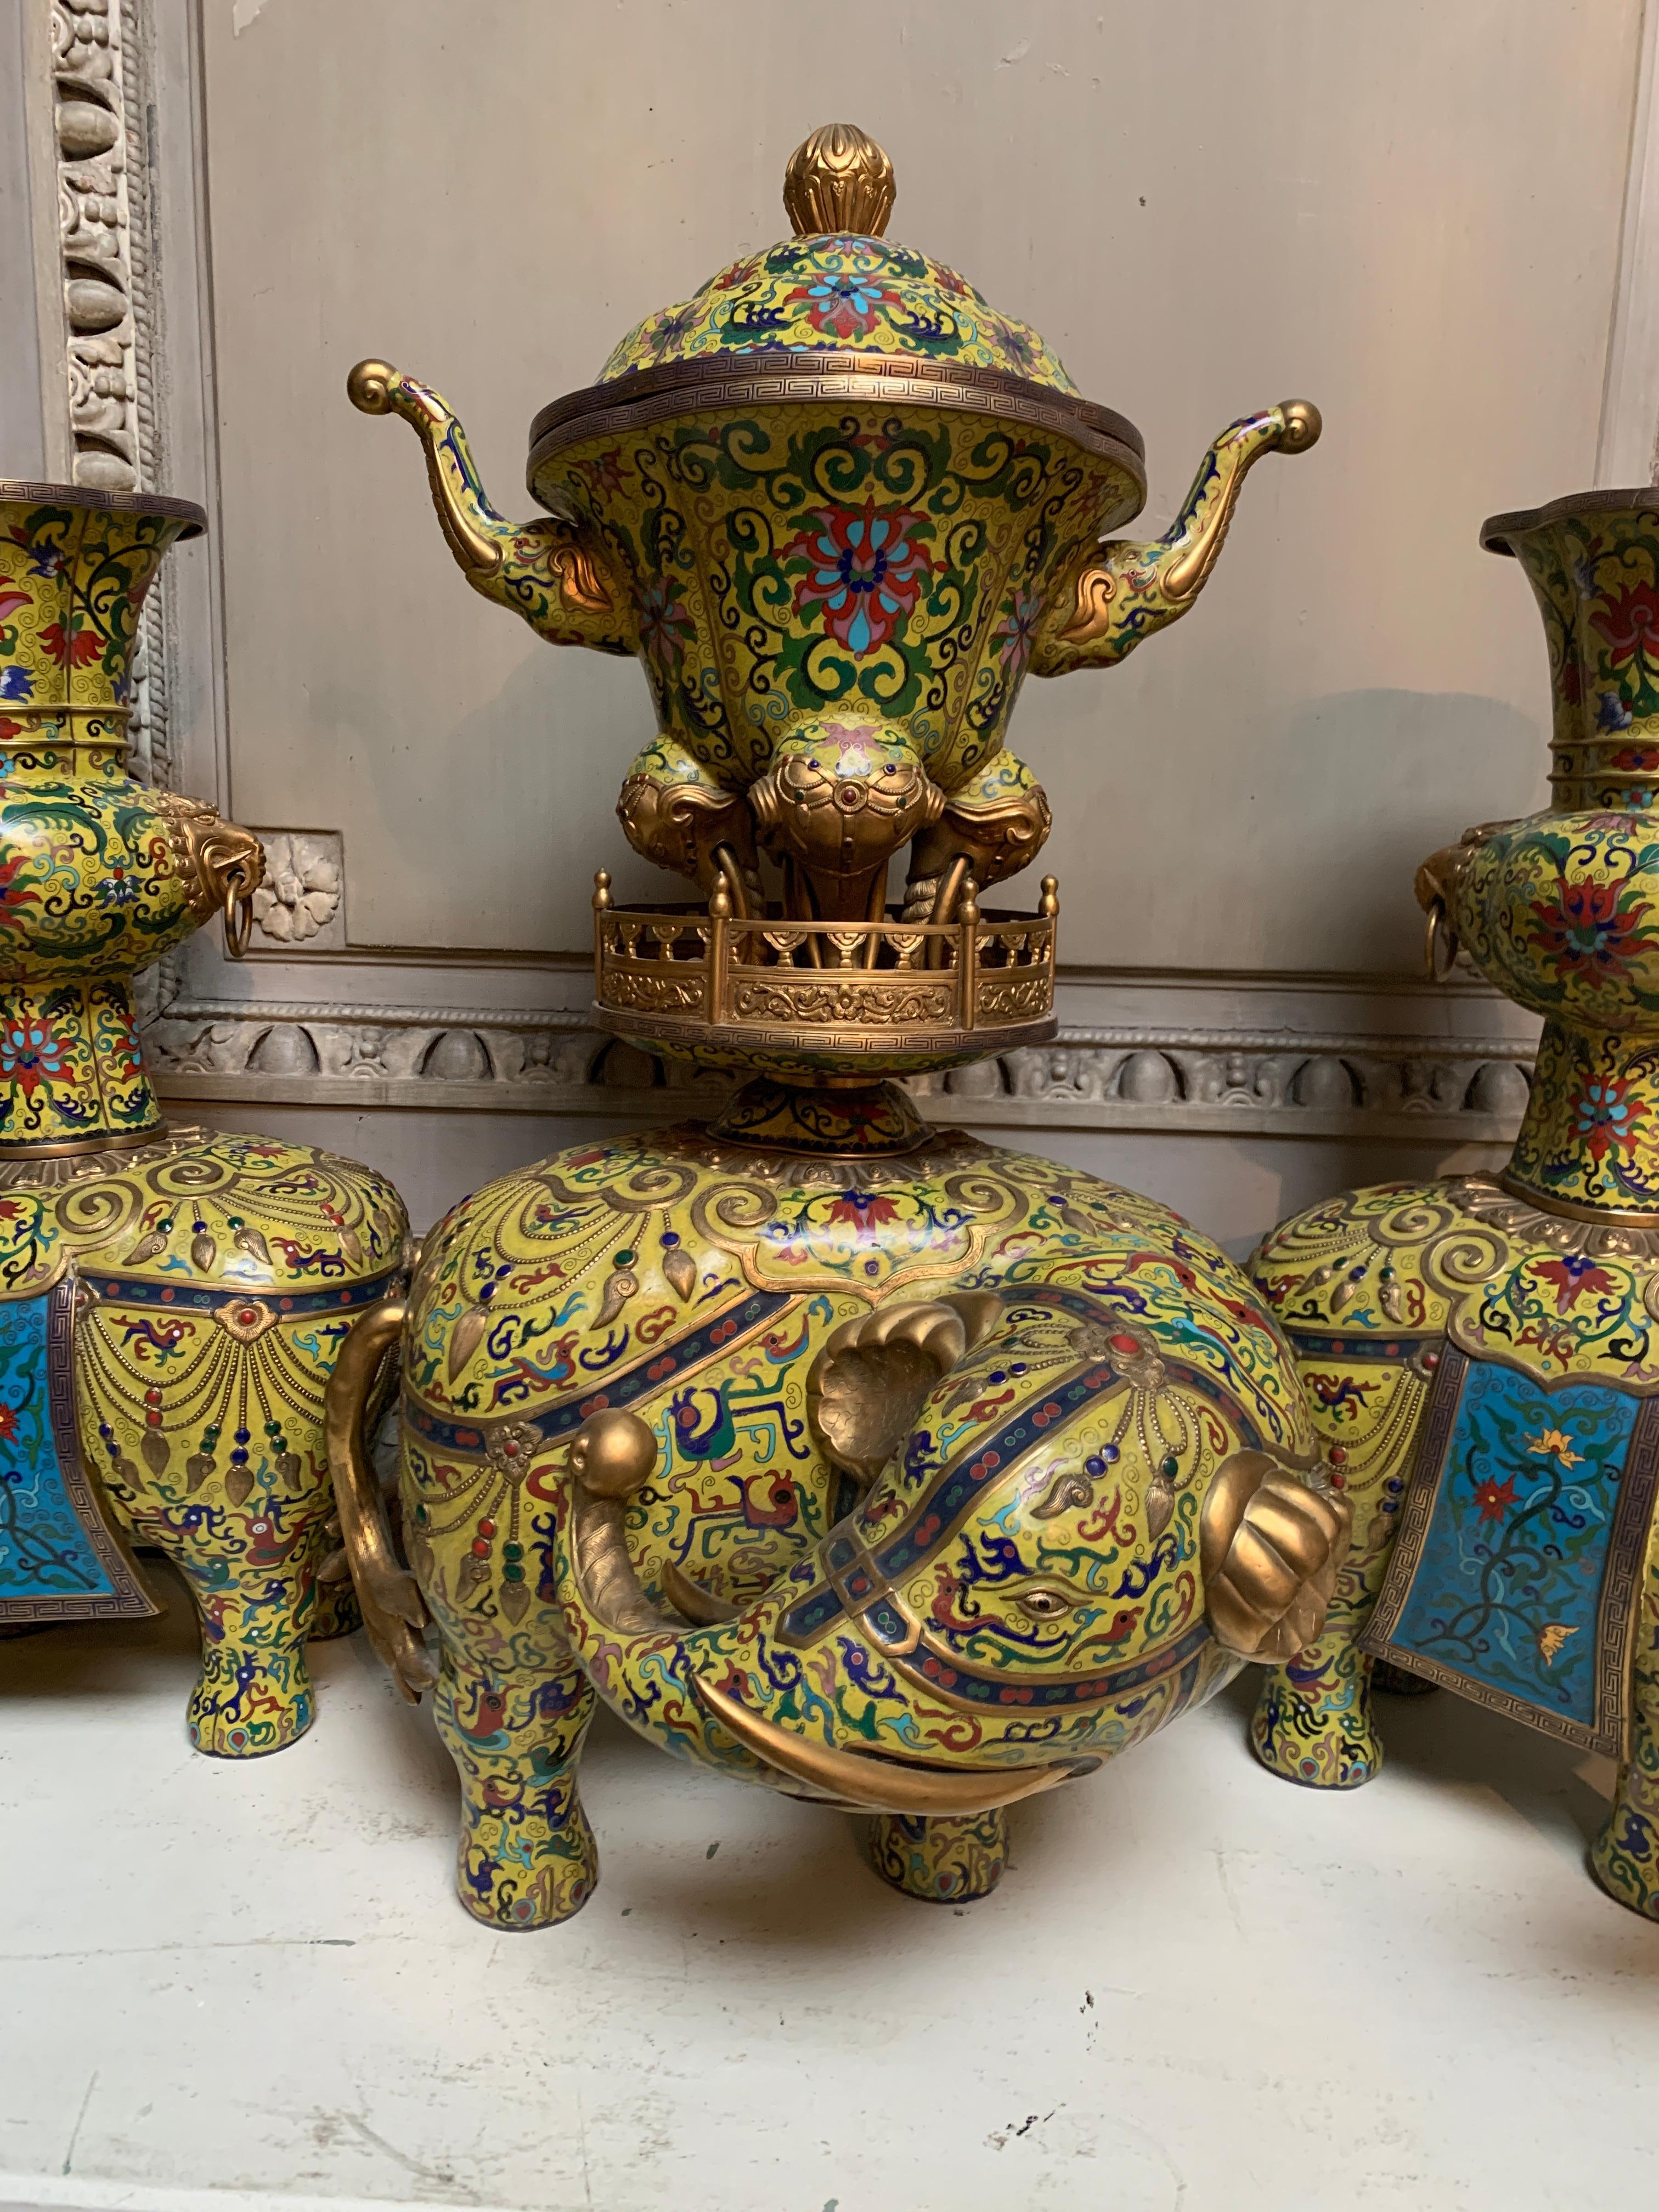 A very fine mid-20th century Chinese yellow and blue cloisonne five piece alter set depicting elephants. The eleven piece set includes 5 elephants, two gu-shaped vases,  two candlesticks and a ding-shaped censer with a domed lid. 